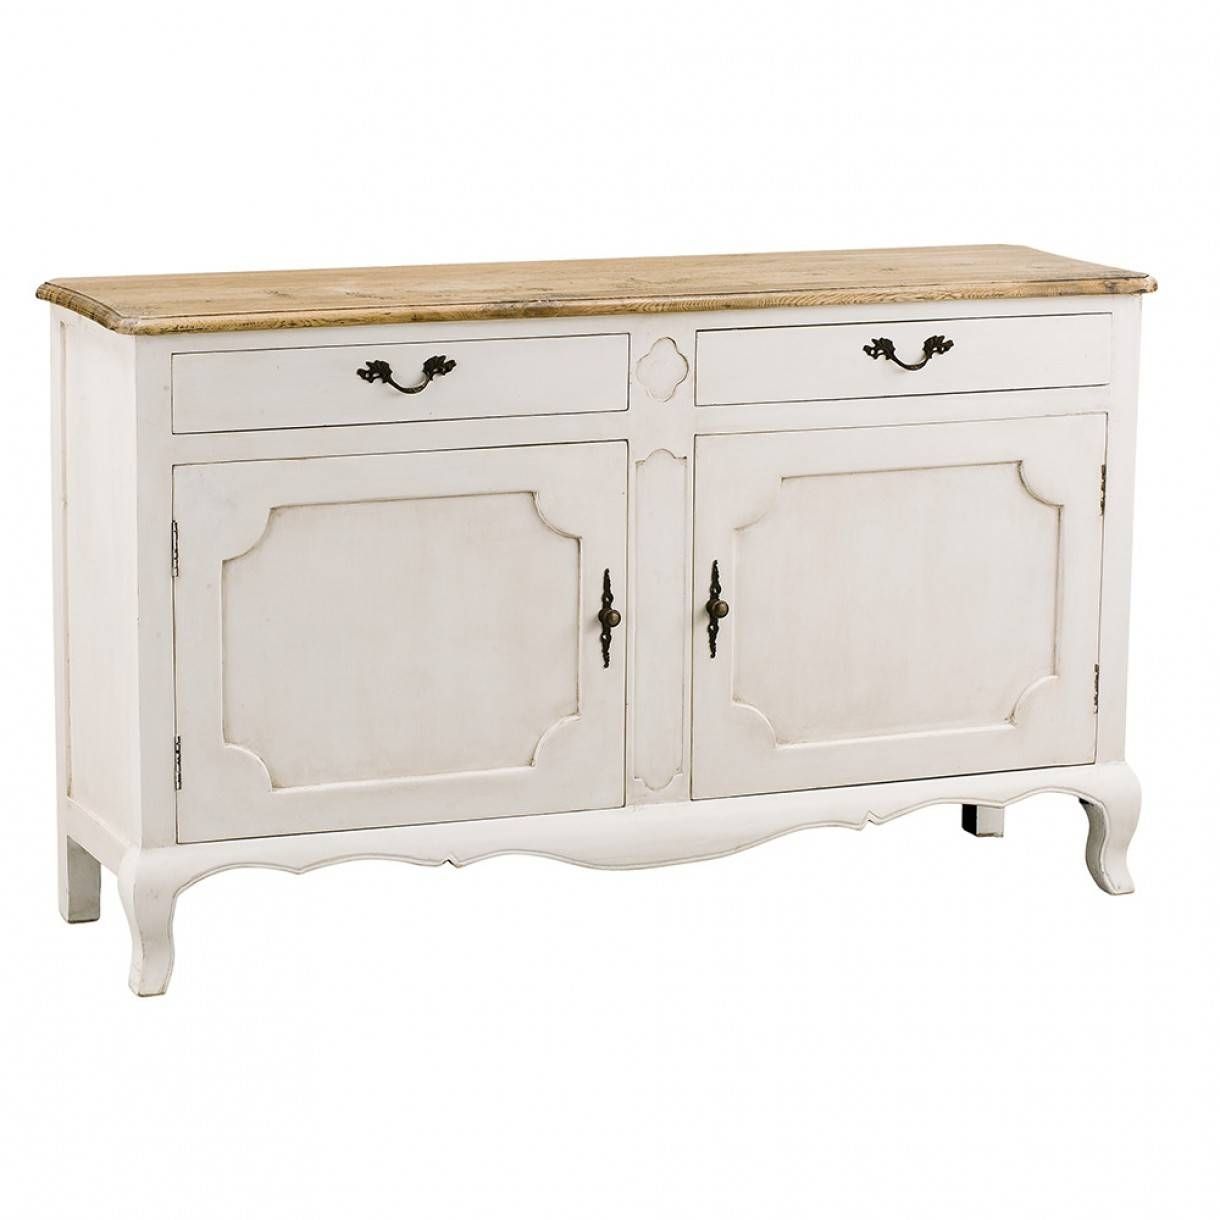 Sideboards. Marvellous White Sideboards Furniture: White Within White Sideboards Furniture (Photo 6 of 20)